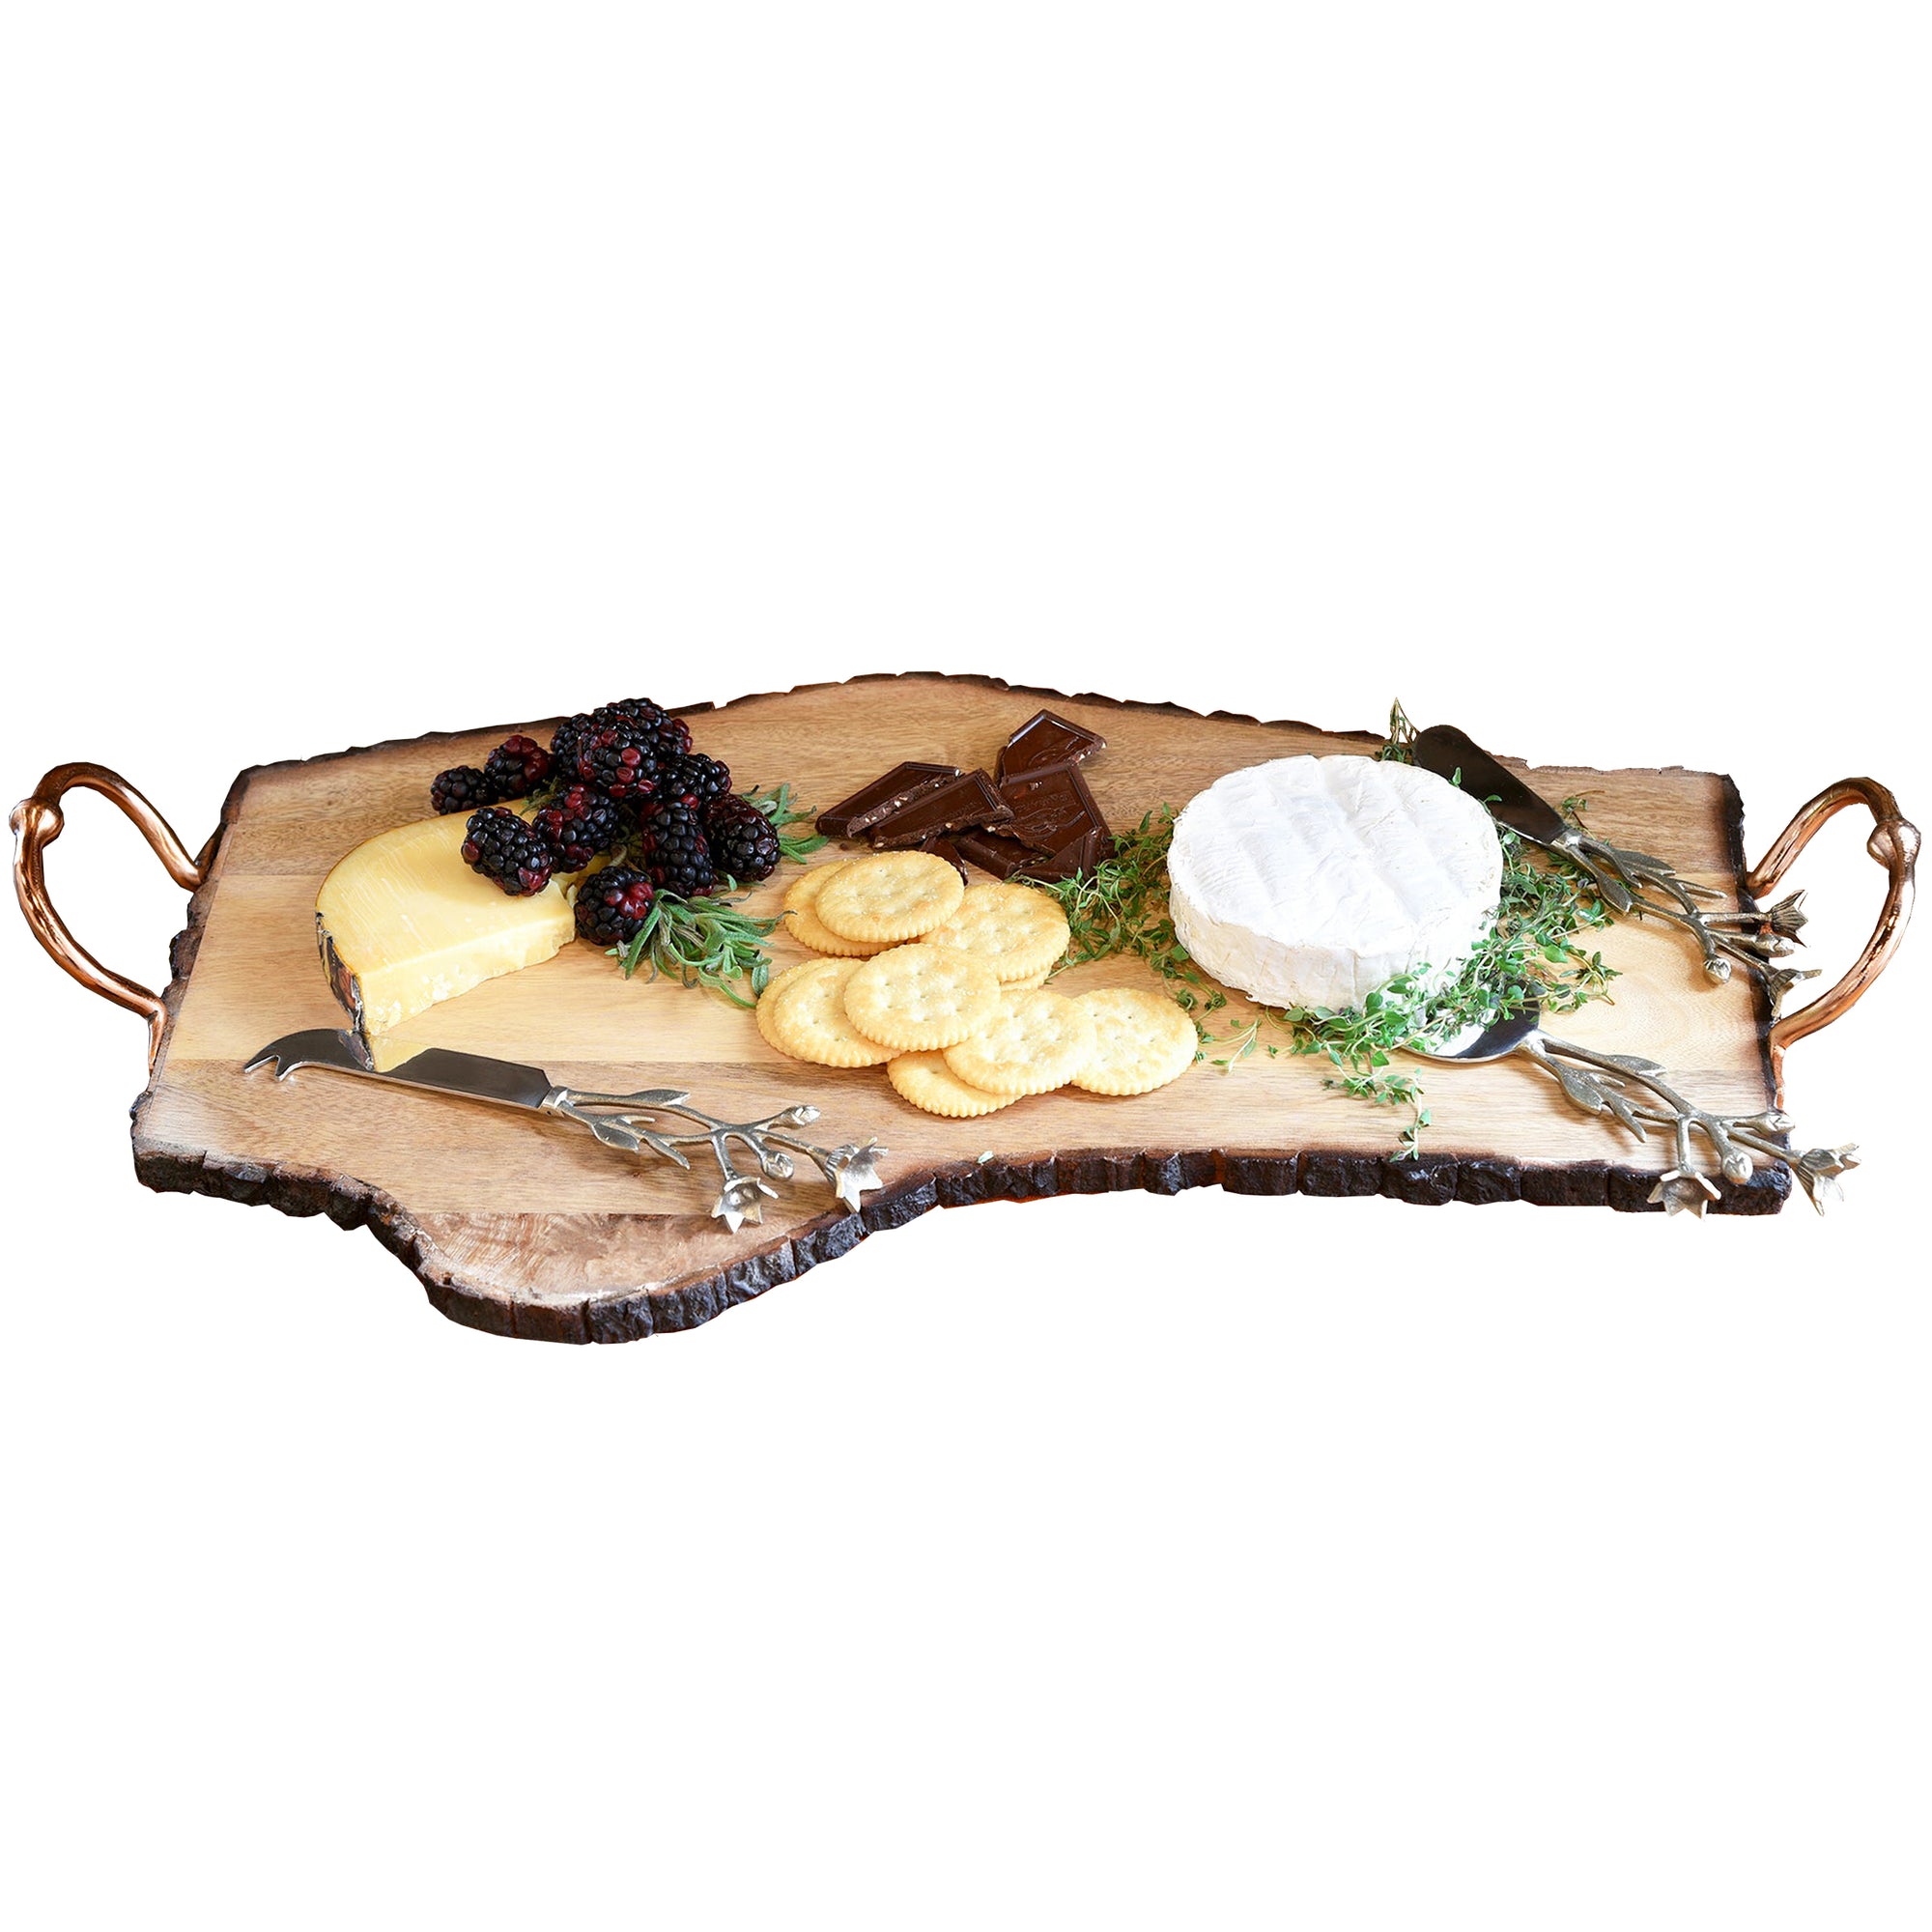 Rustic Wood Bark Edge Cheese and Charcuterie Serving Board